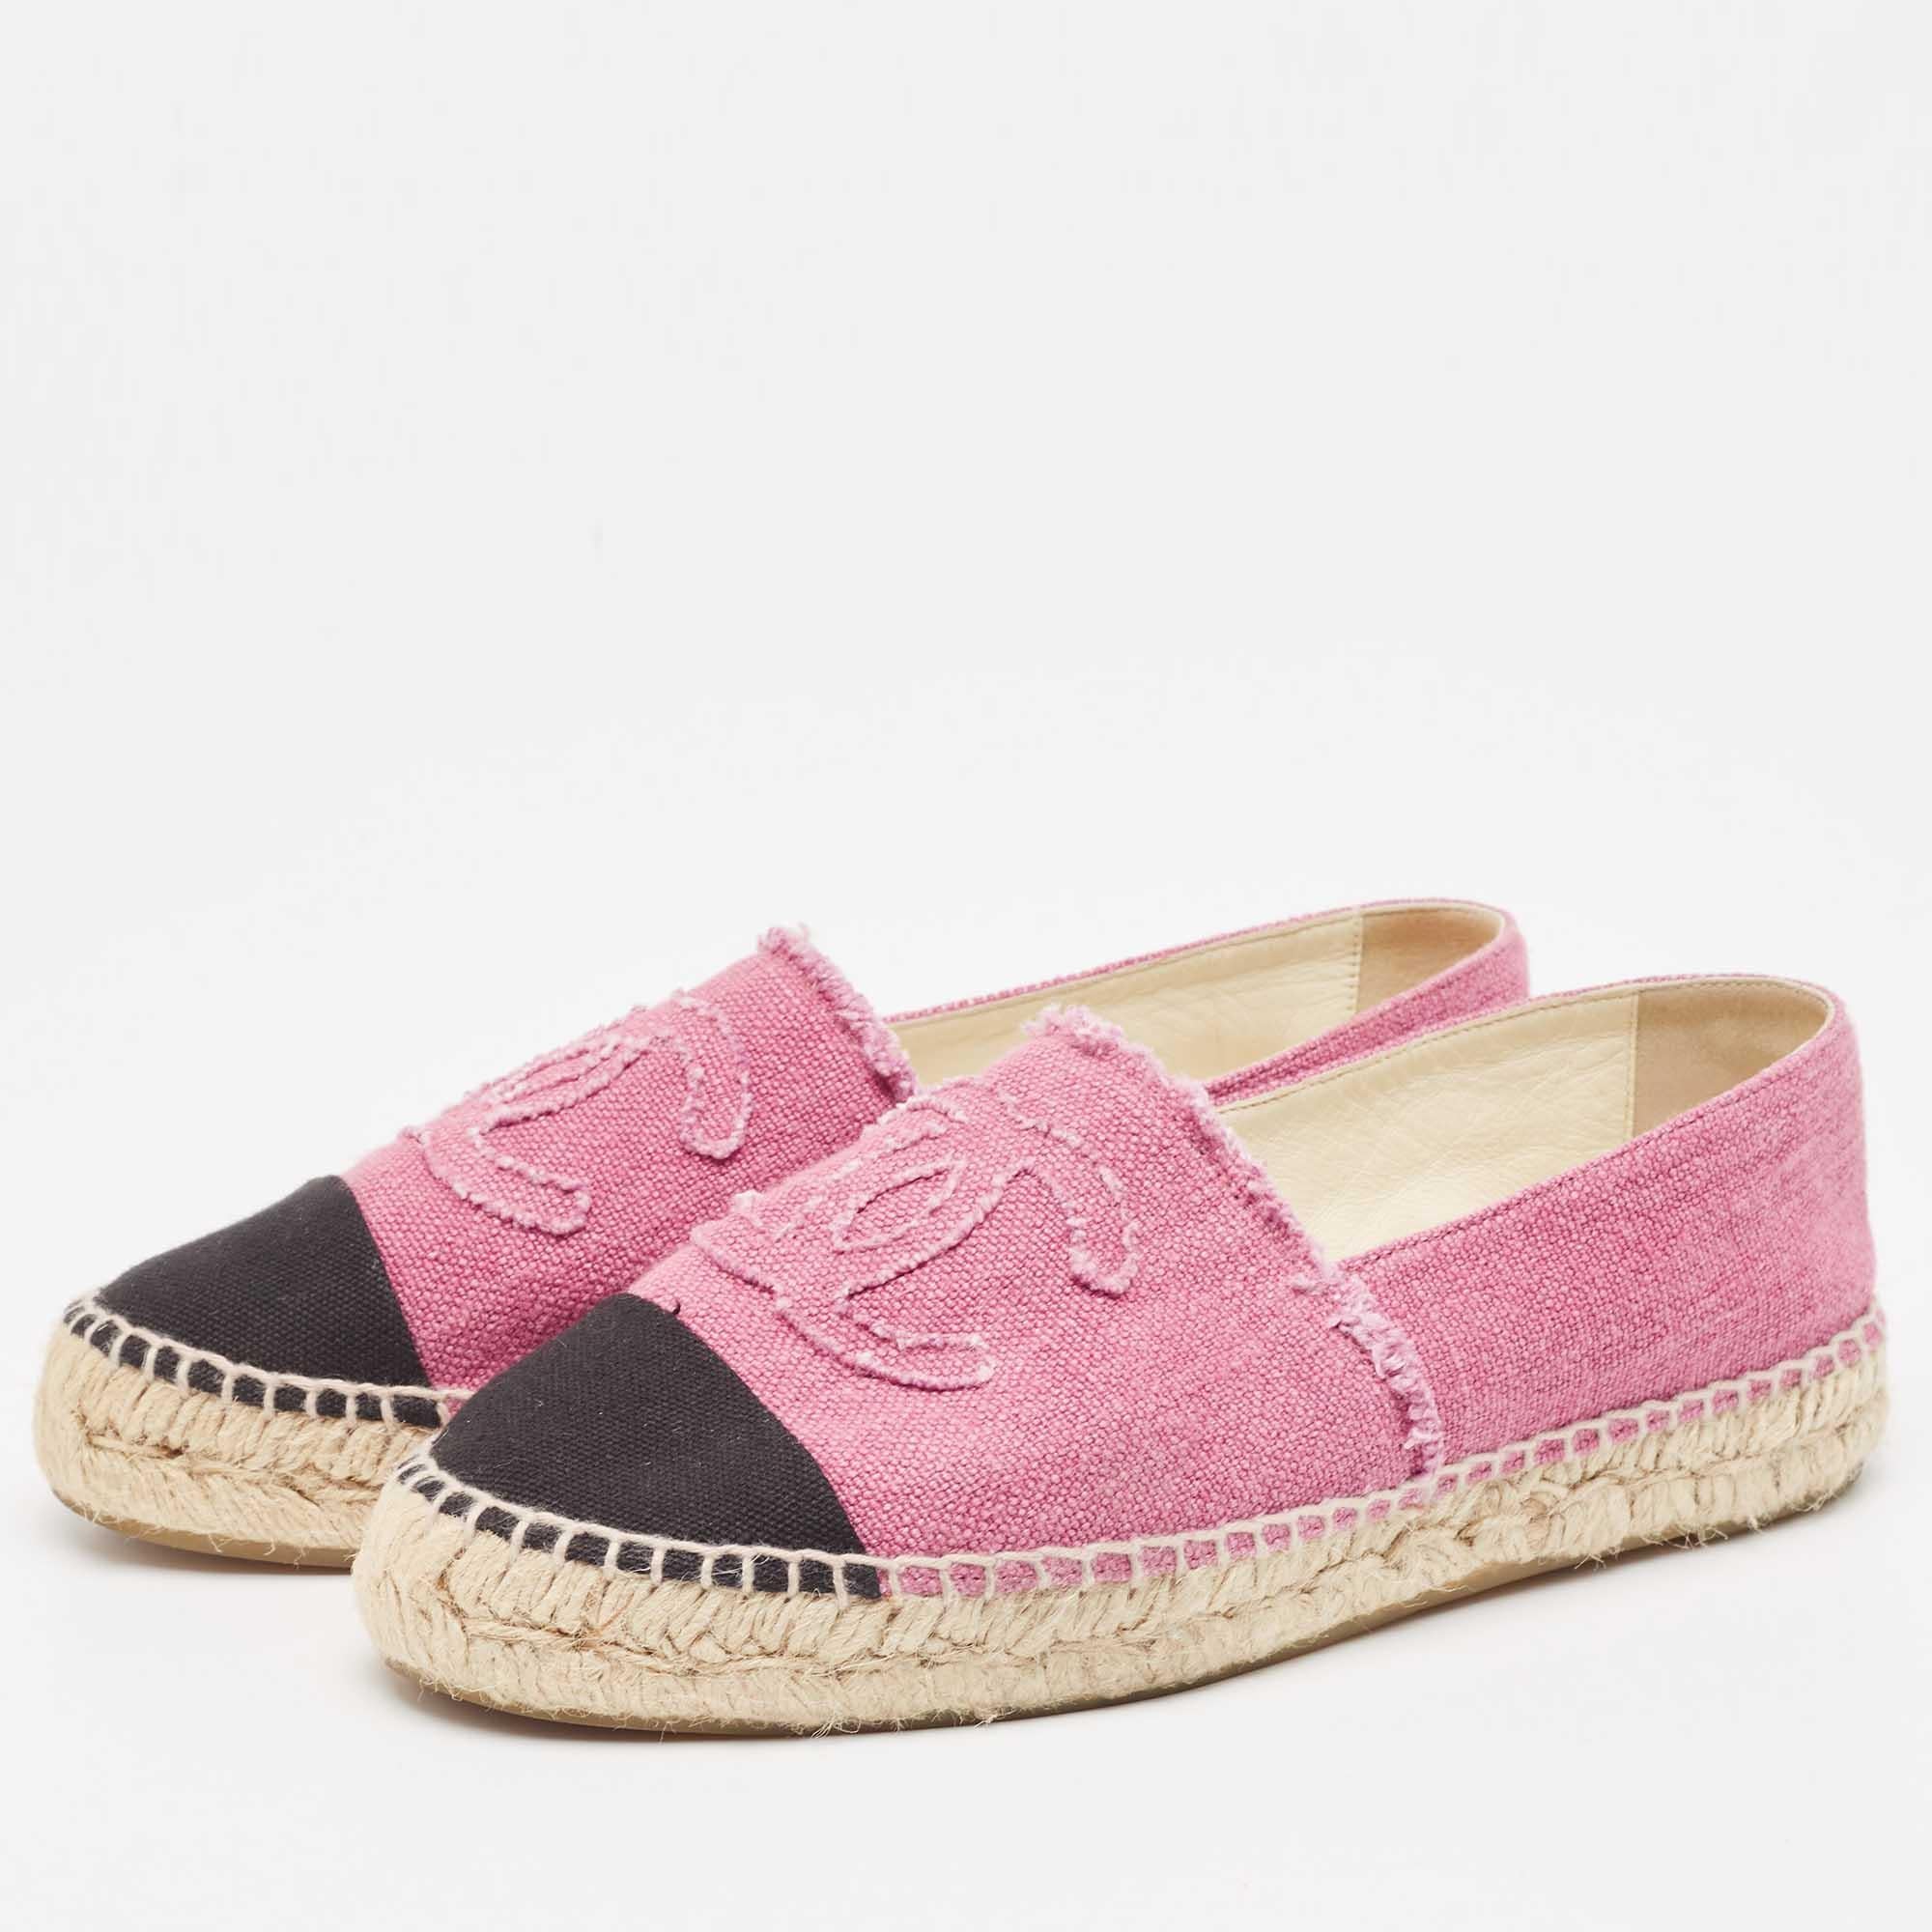 These designer espadrilles exude cool summer vibes while giving all the comfort to your feet. They bring along a well-built silhouette and the house's signature aesthetics. Wear them with anything: jeans, dresses, shorts.

Includes: Original Dustbag